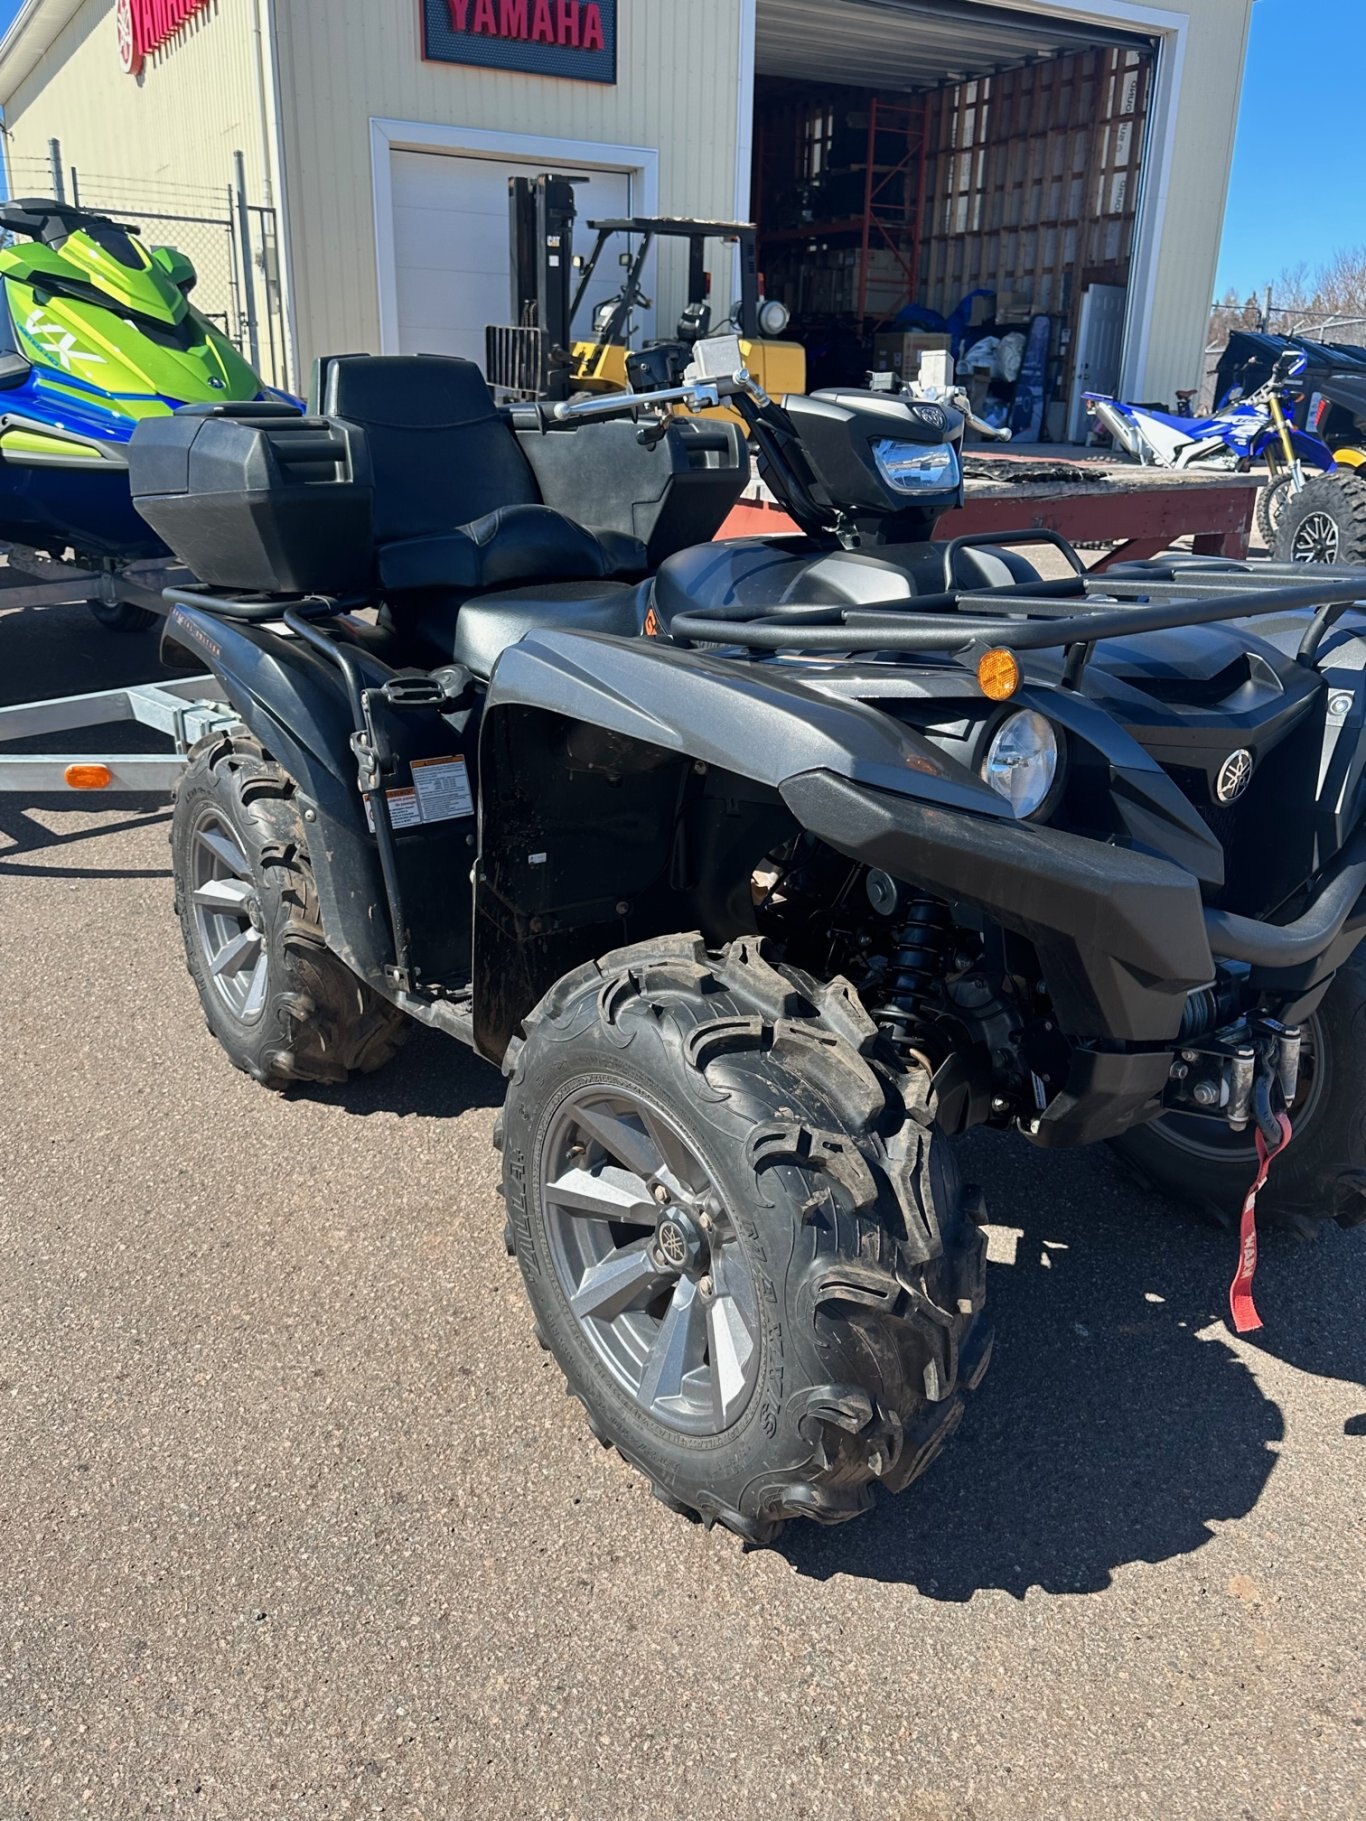 2022 Yamaha GRIZZLY EPS SE  with Camso Tracks & YMPP Warranty until Mar 25/2027 - Only 2606kms